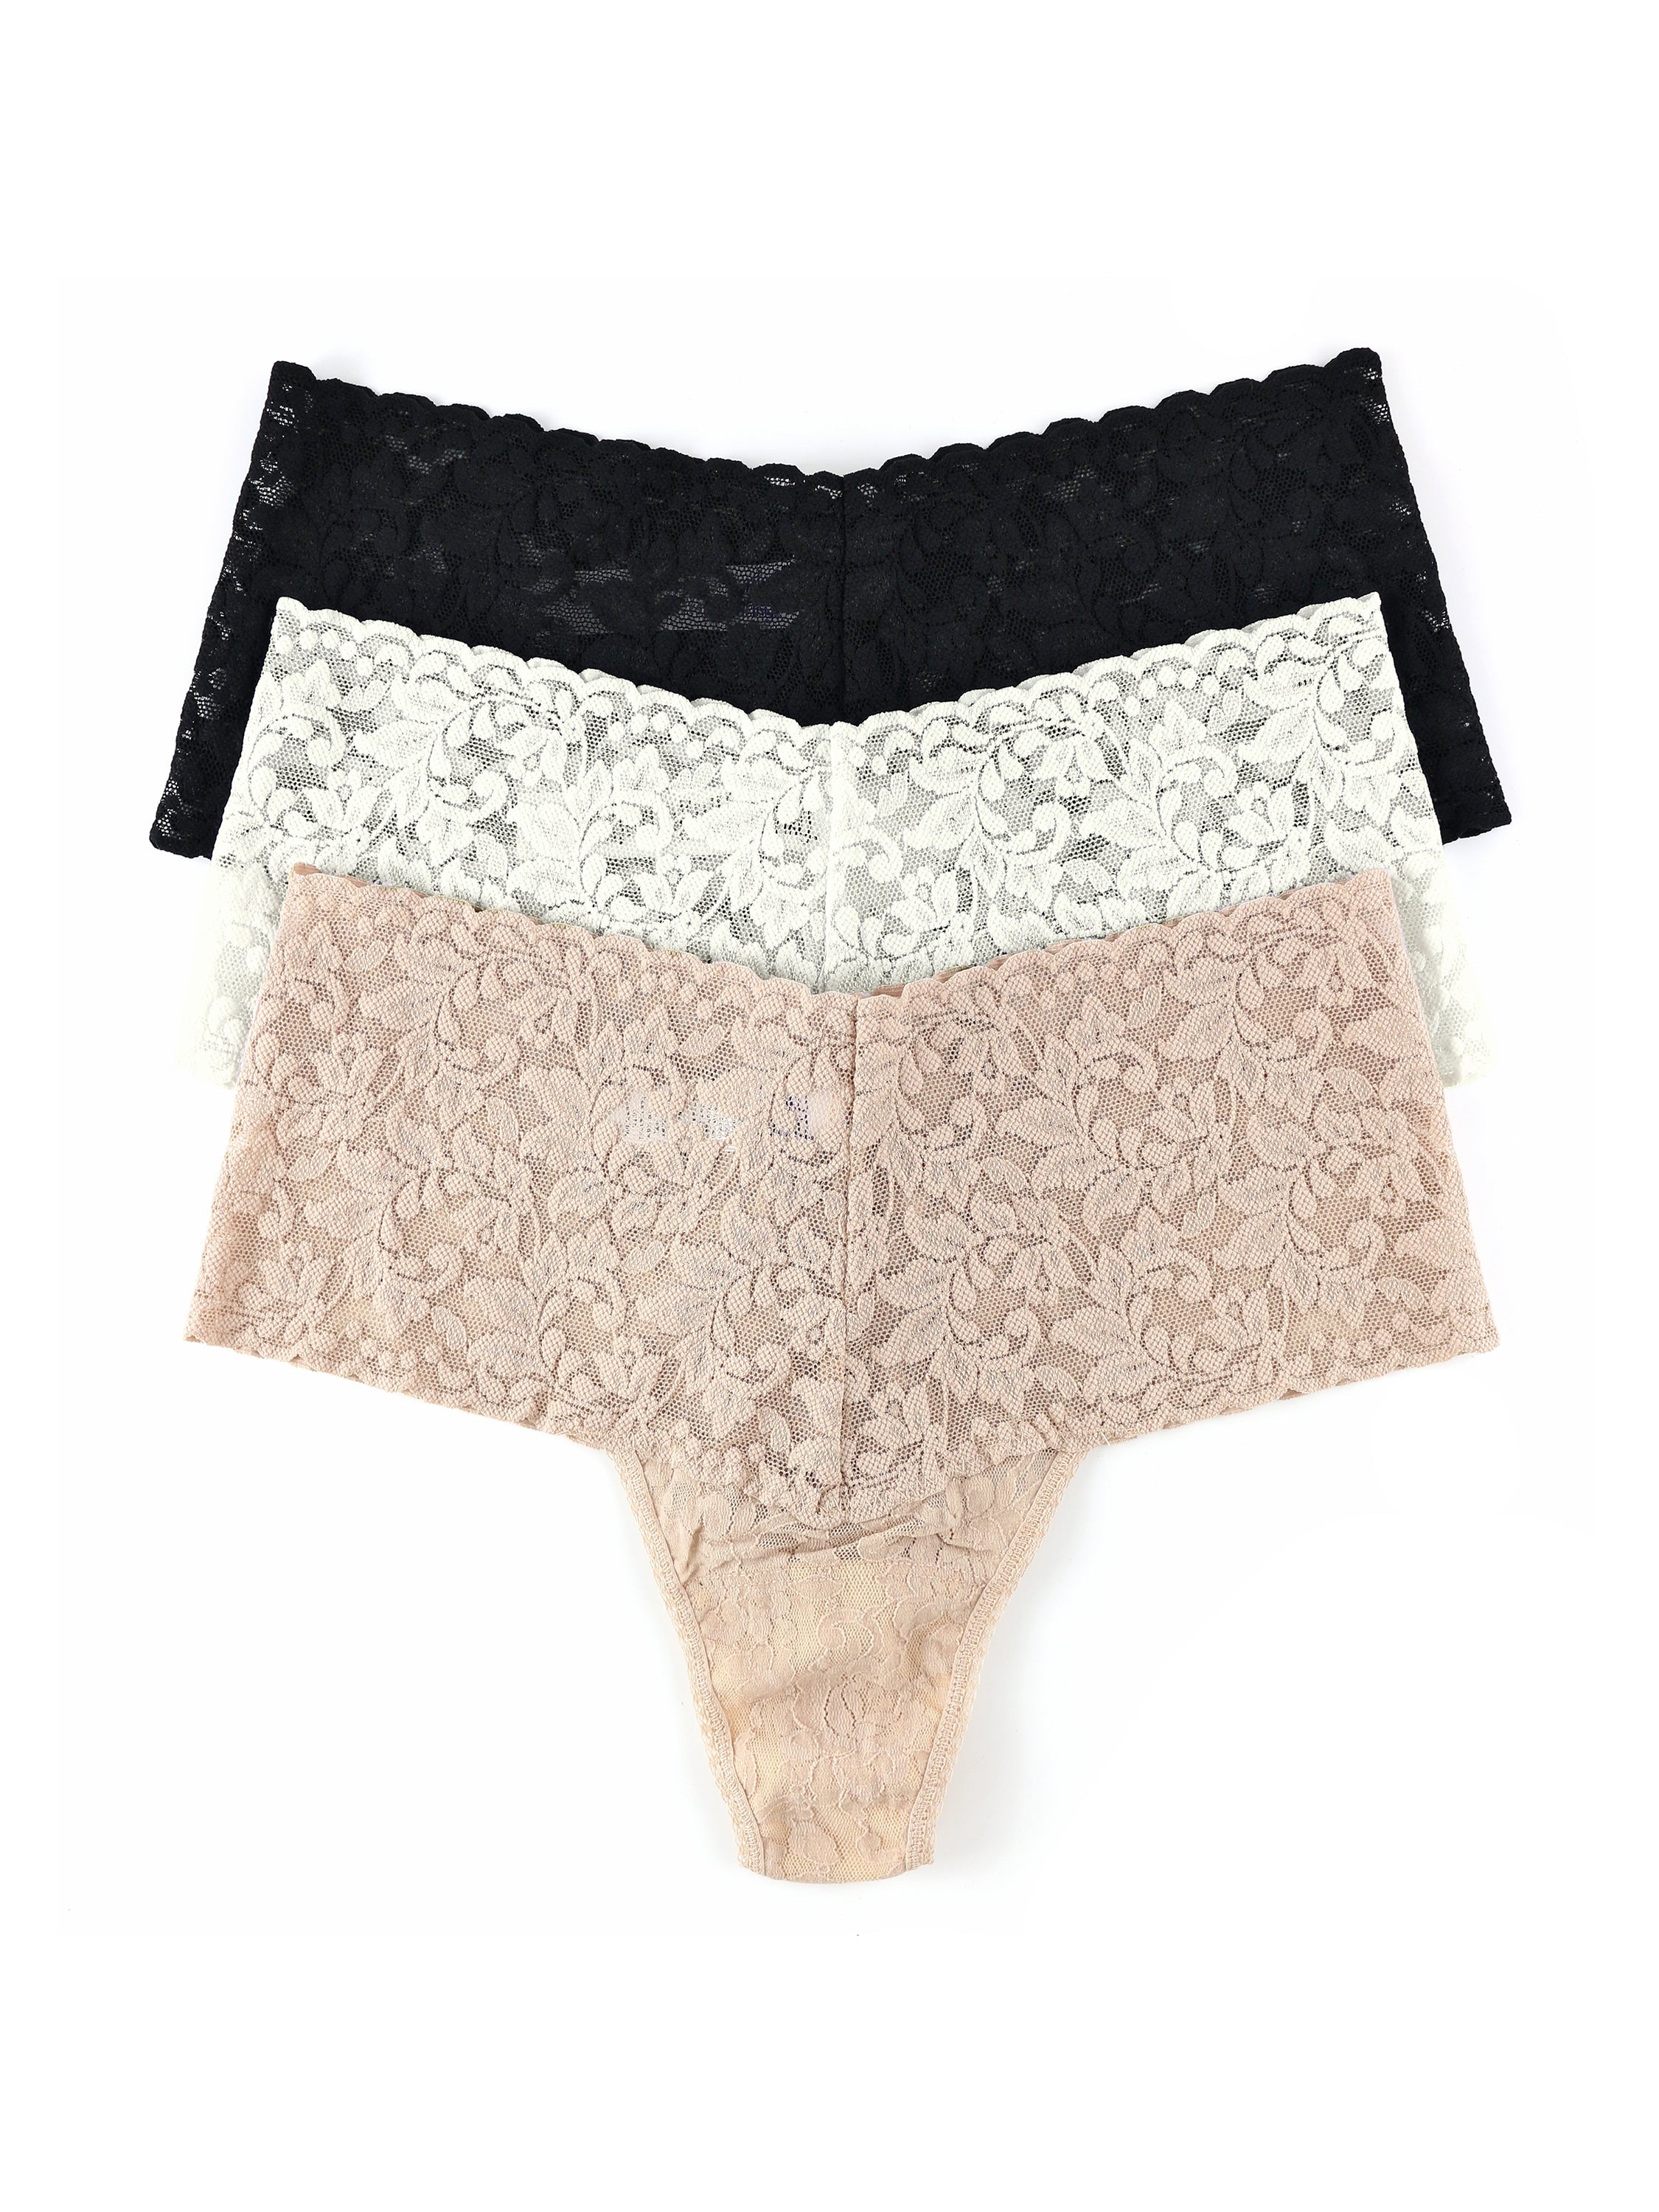 3 Pack Retro Lace Thong Exclusive in Black Chai Marshmallow